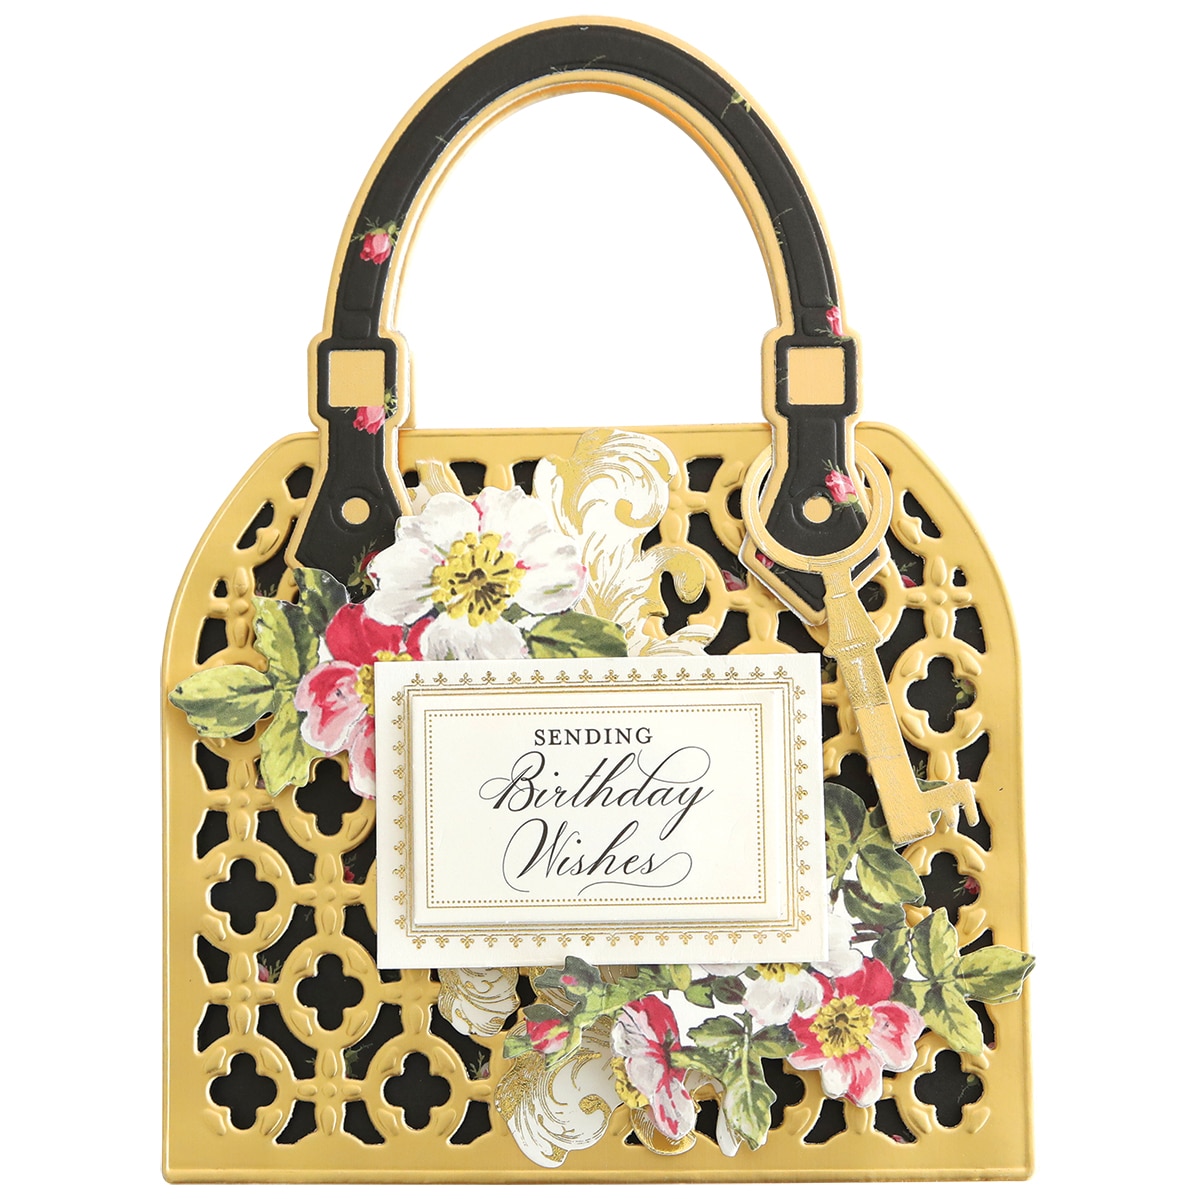 A black and gold birthday card with a handbag on it.